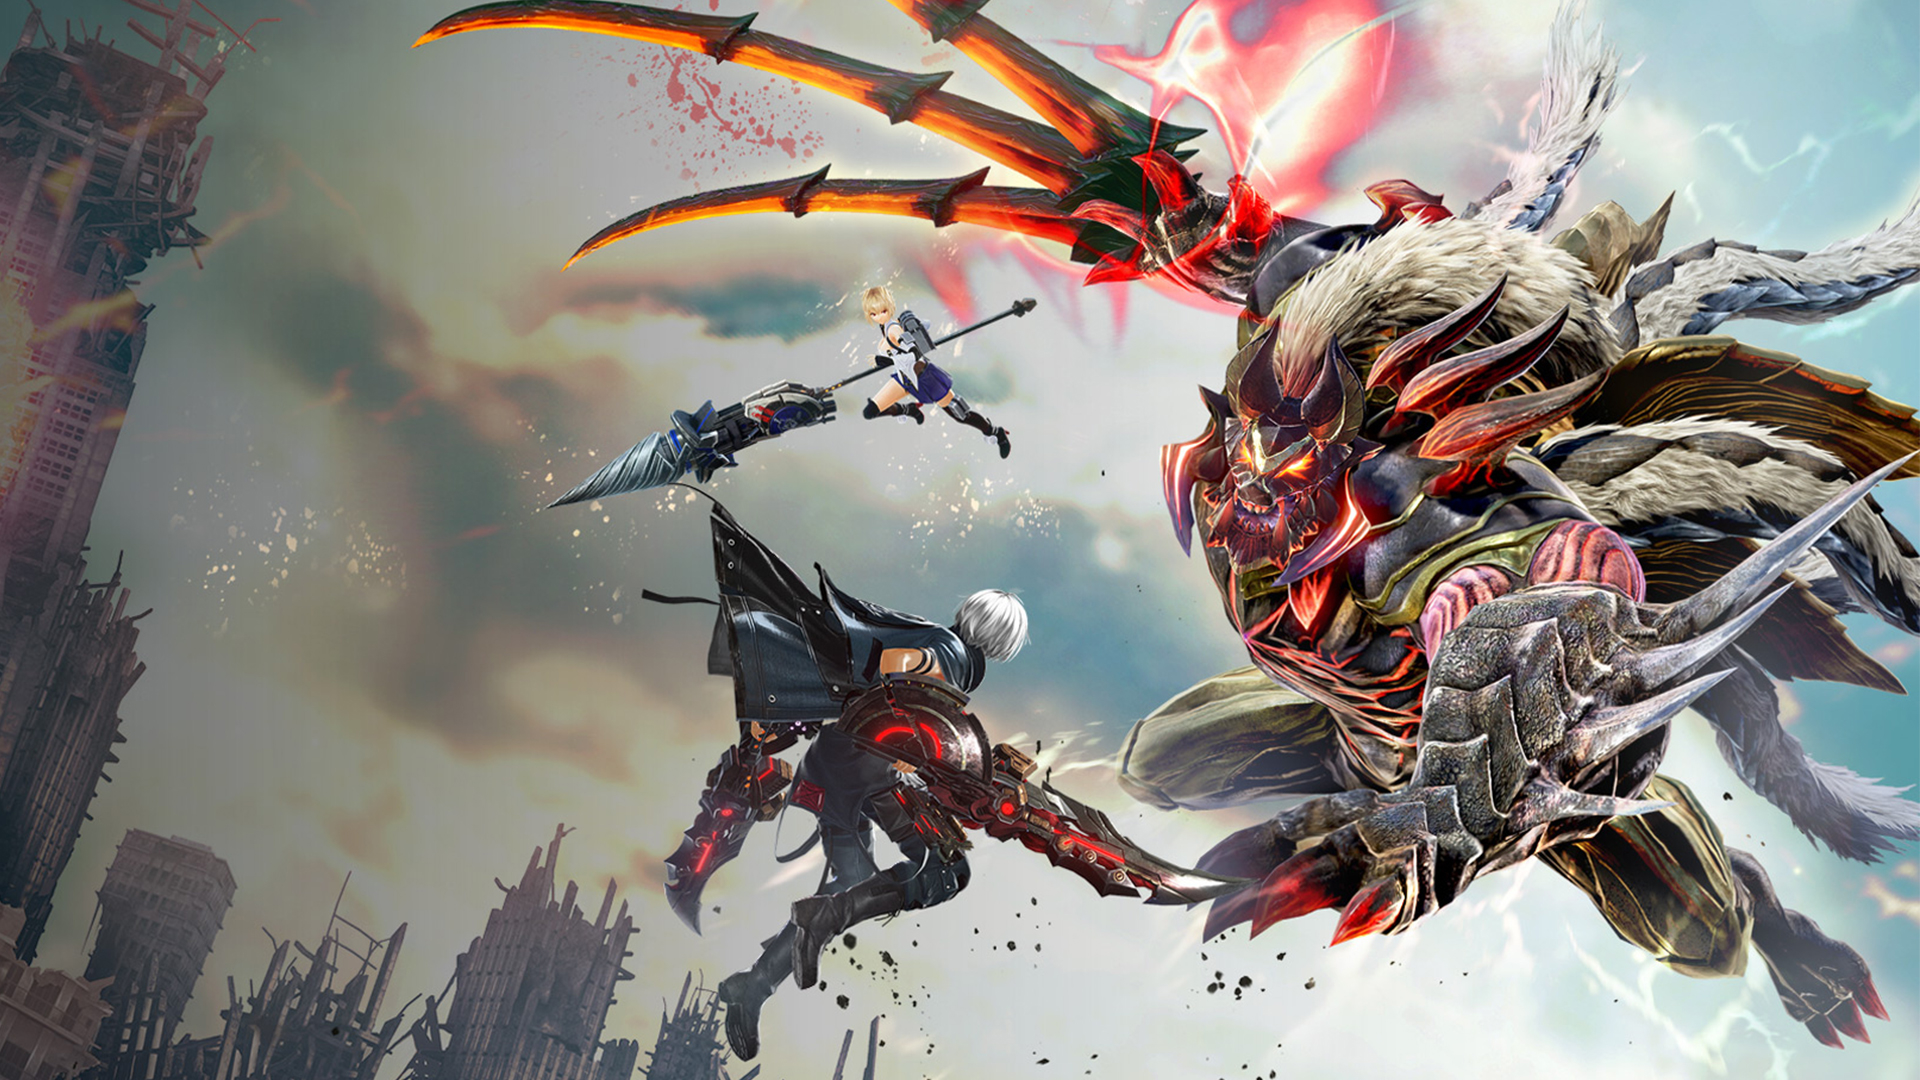 God Eater 3 Wallpaper, HD Games 4K Wallpapers, Image, Photos and.